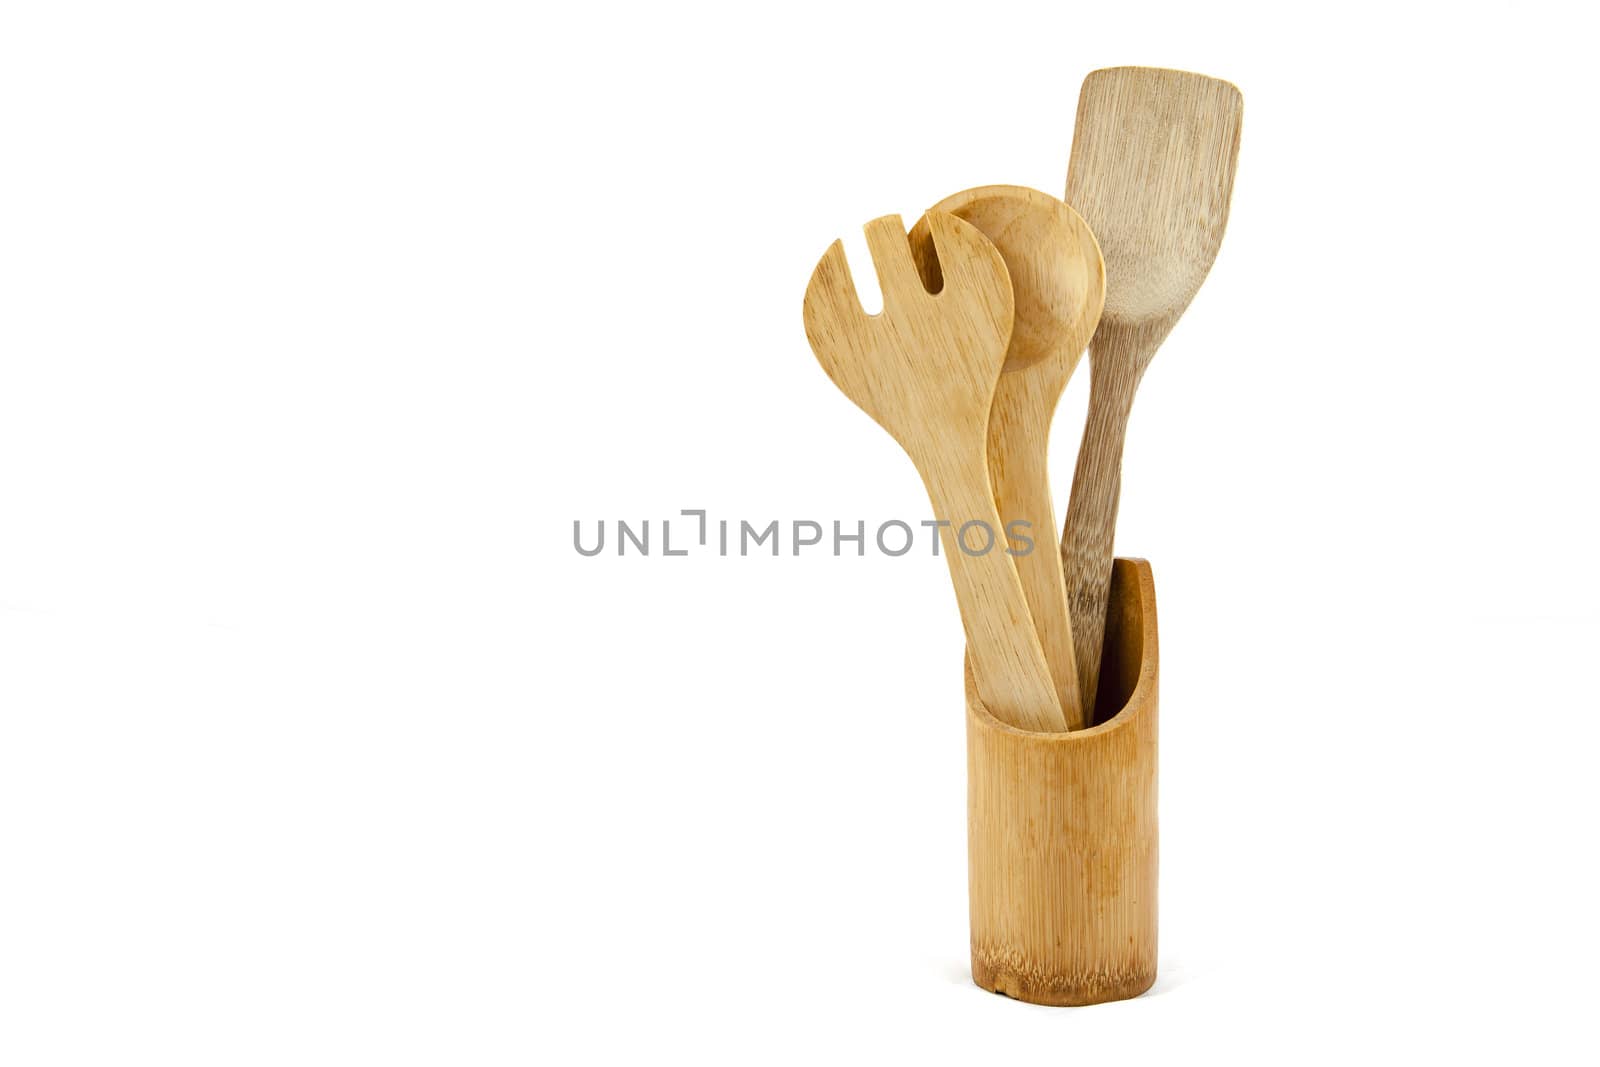 Utensils by PhotoWorks